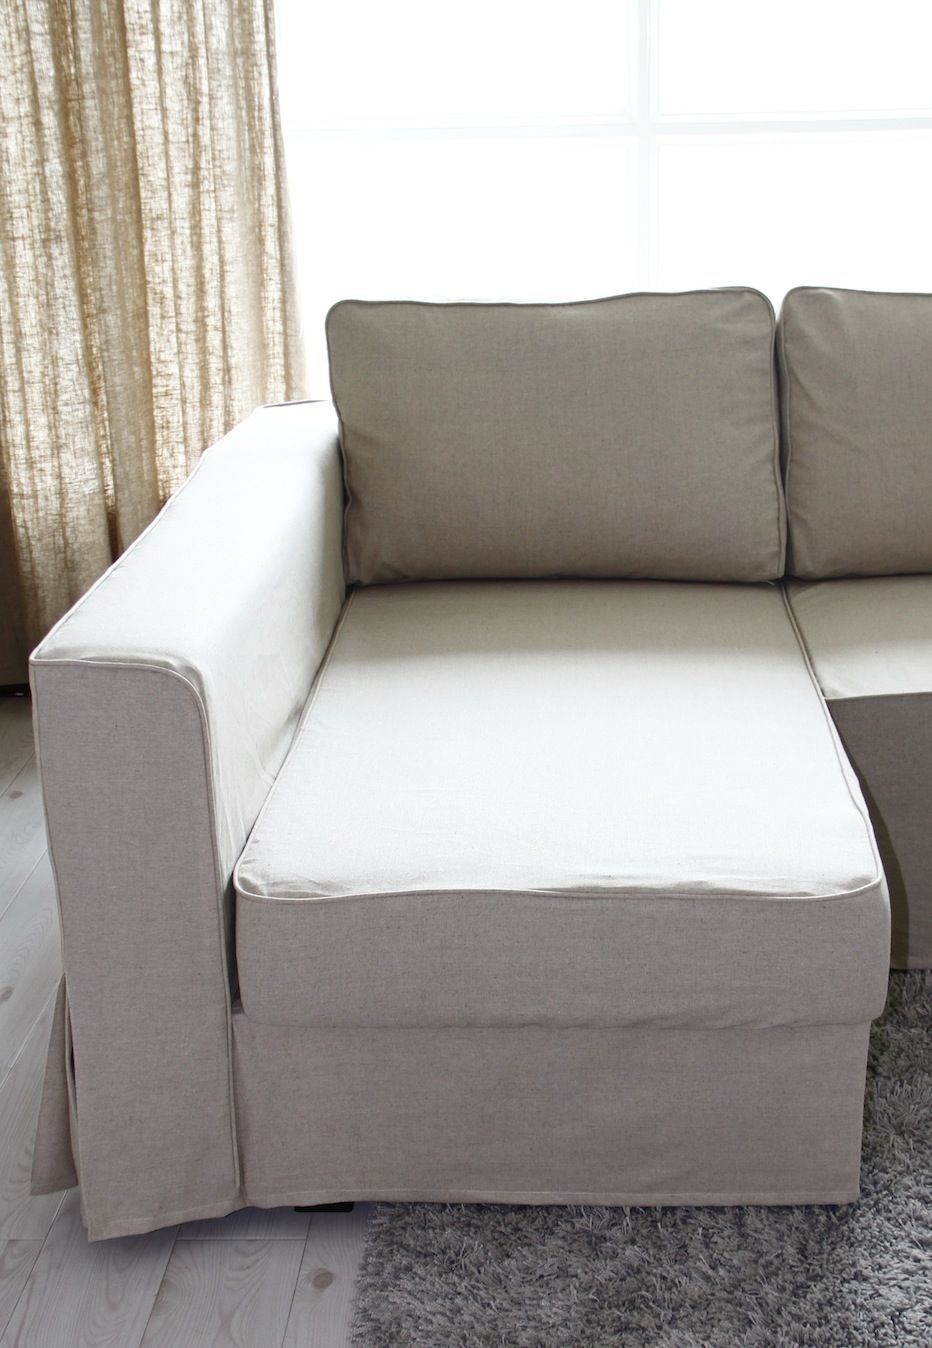 Loose Fit Linen Manstad Sofa Slipcovers Now Available | Sofa Intended For Manstad Sofas (Photo 6138 of 7825)